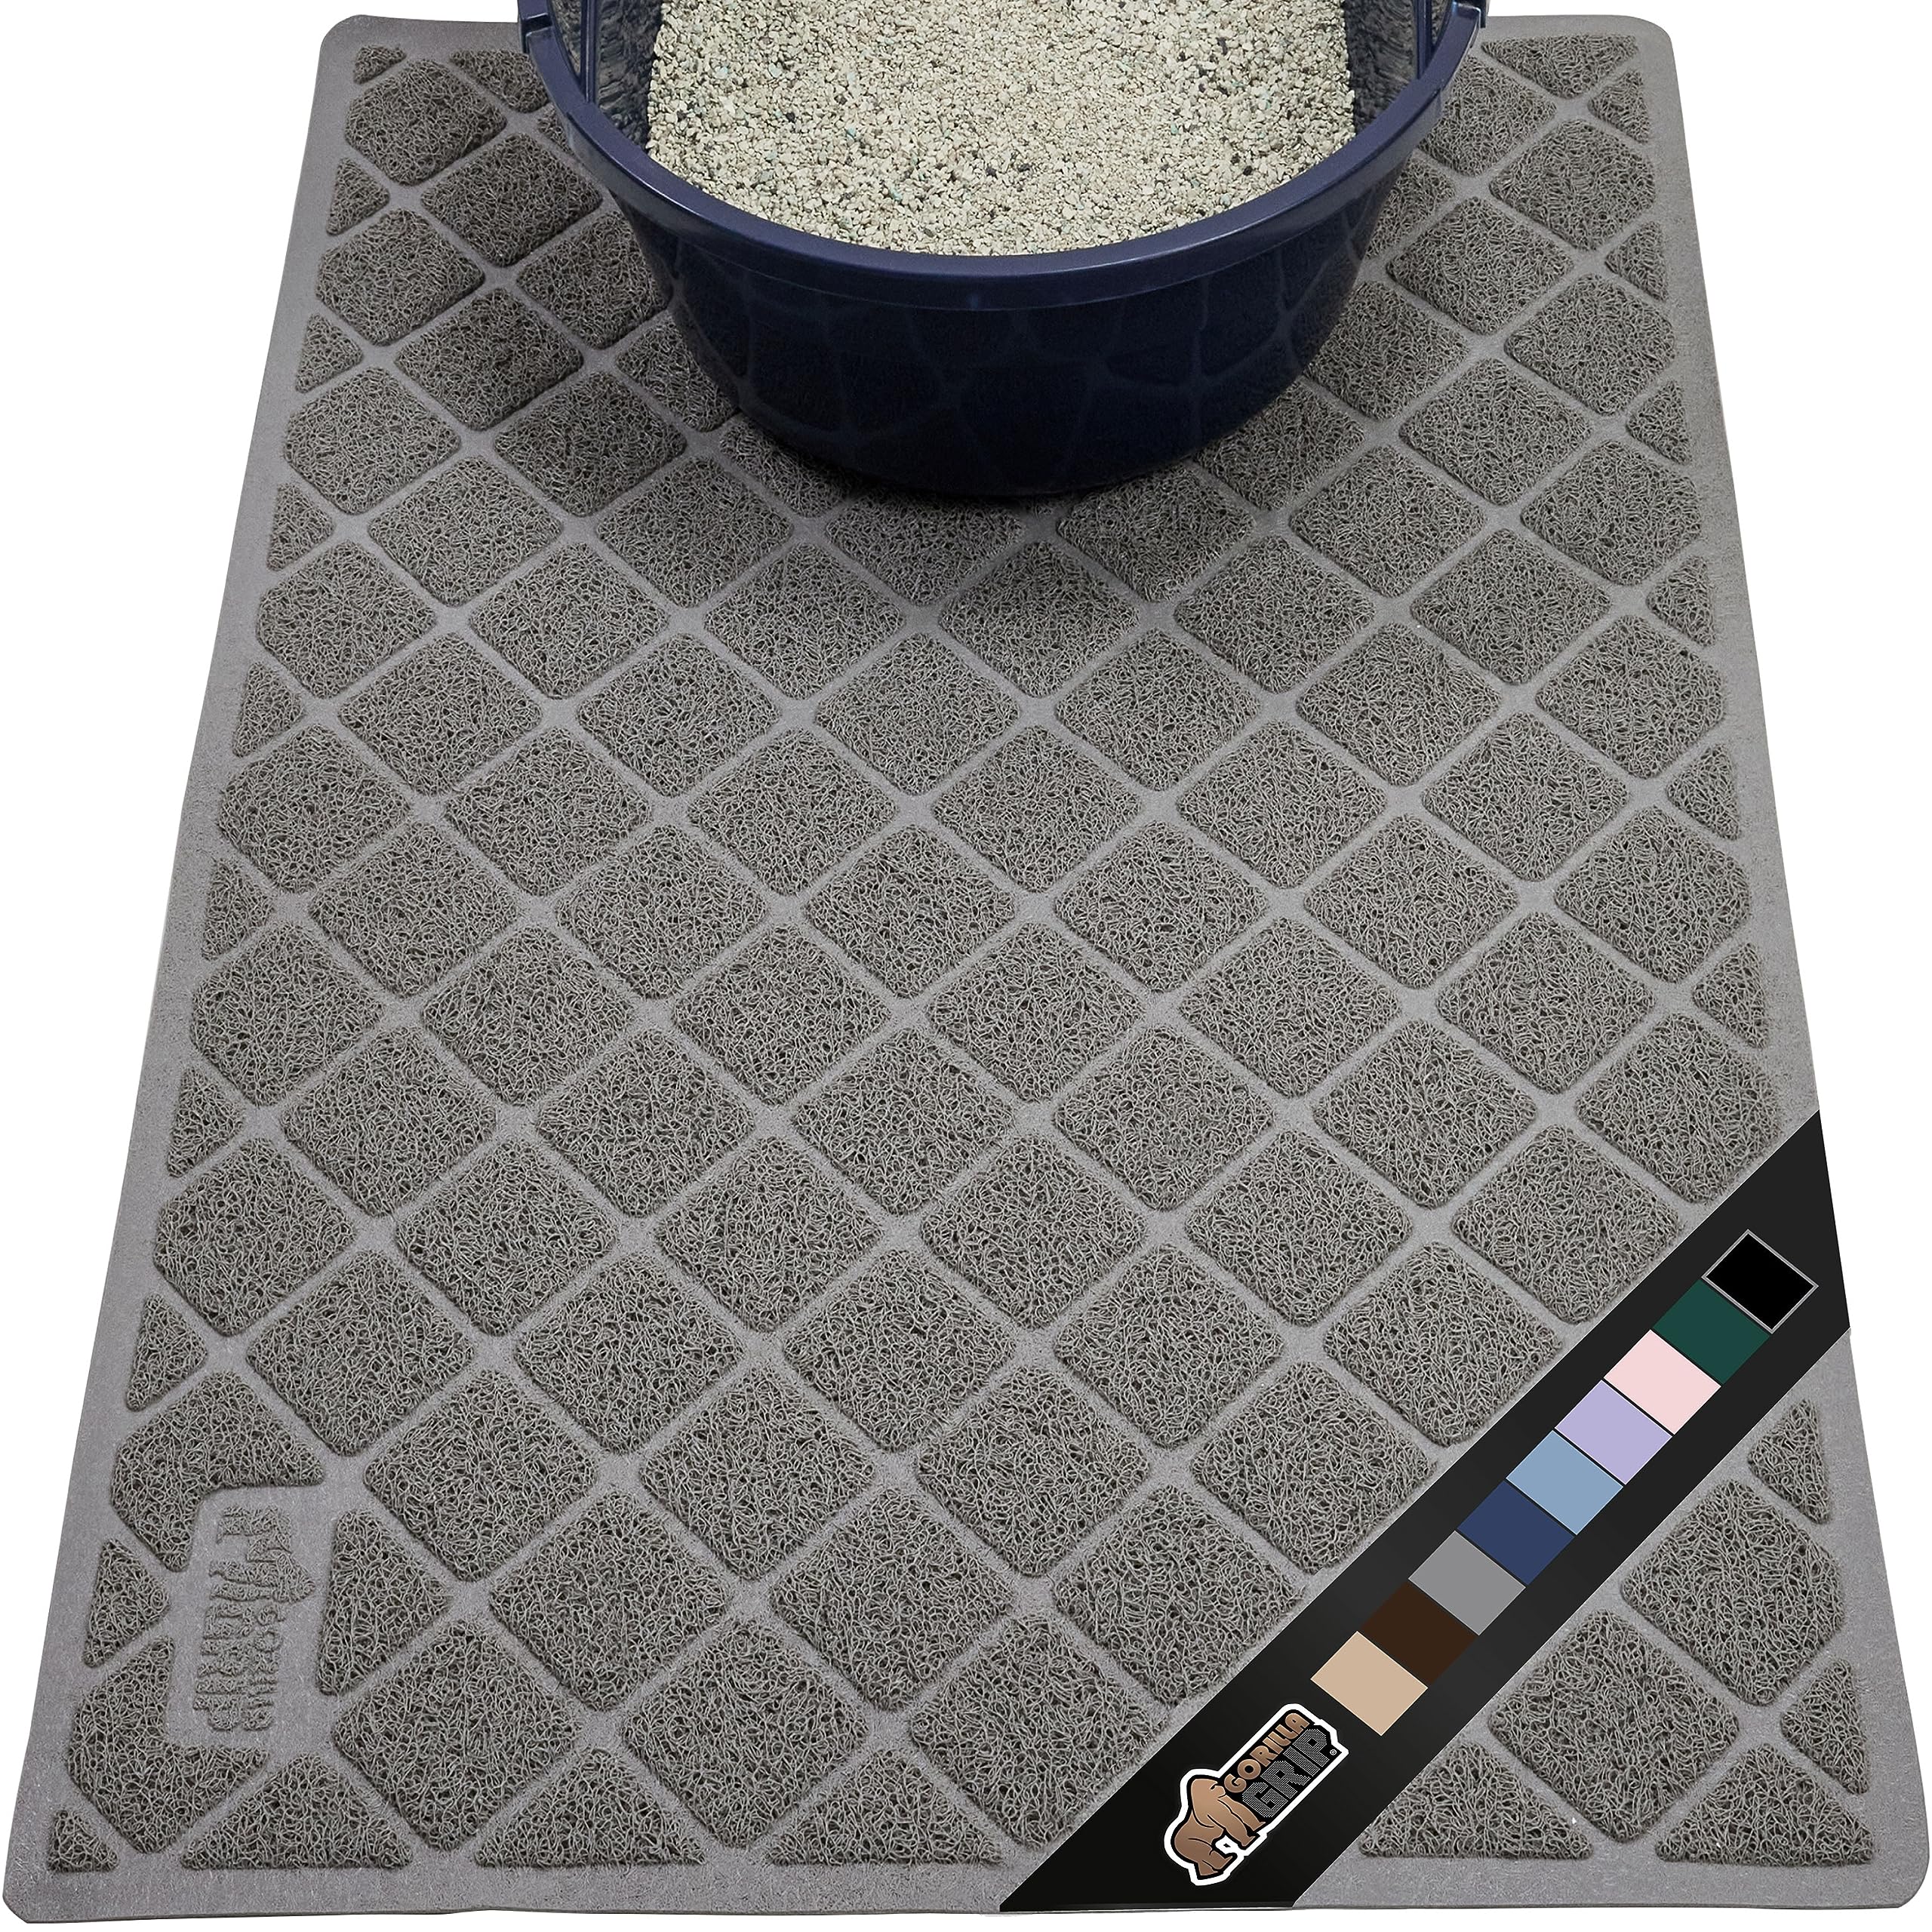 Gorilla Grip The Original Gorilla Grip 100% Waterproof Cat Litter Box Trapping Mat, Easy Clean, Textured Backing, Traps Mess for Cleaner Floo